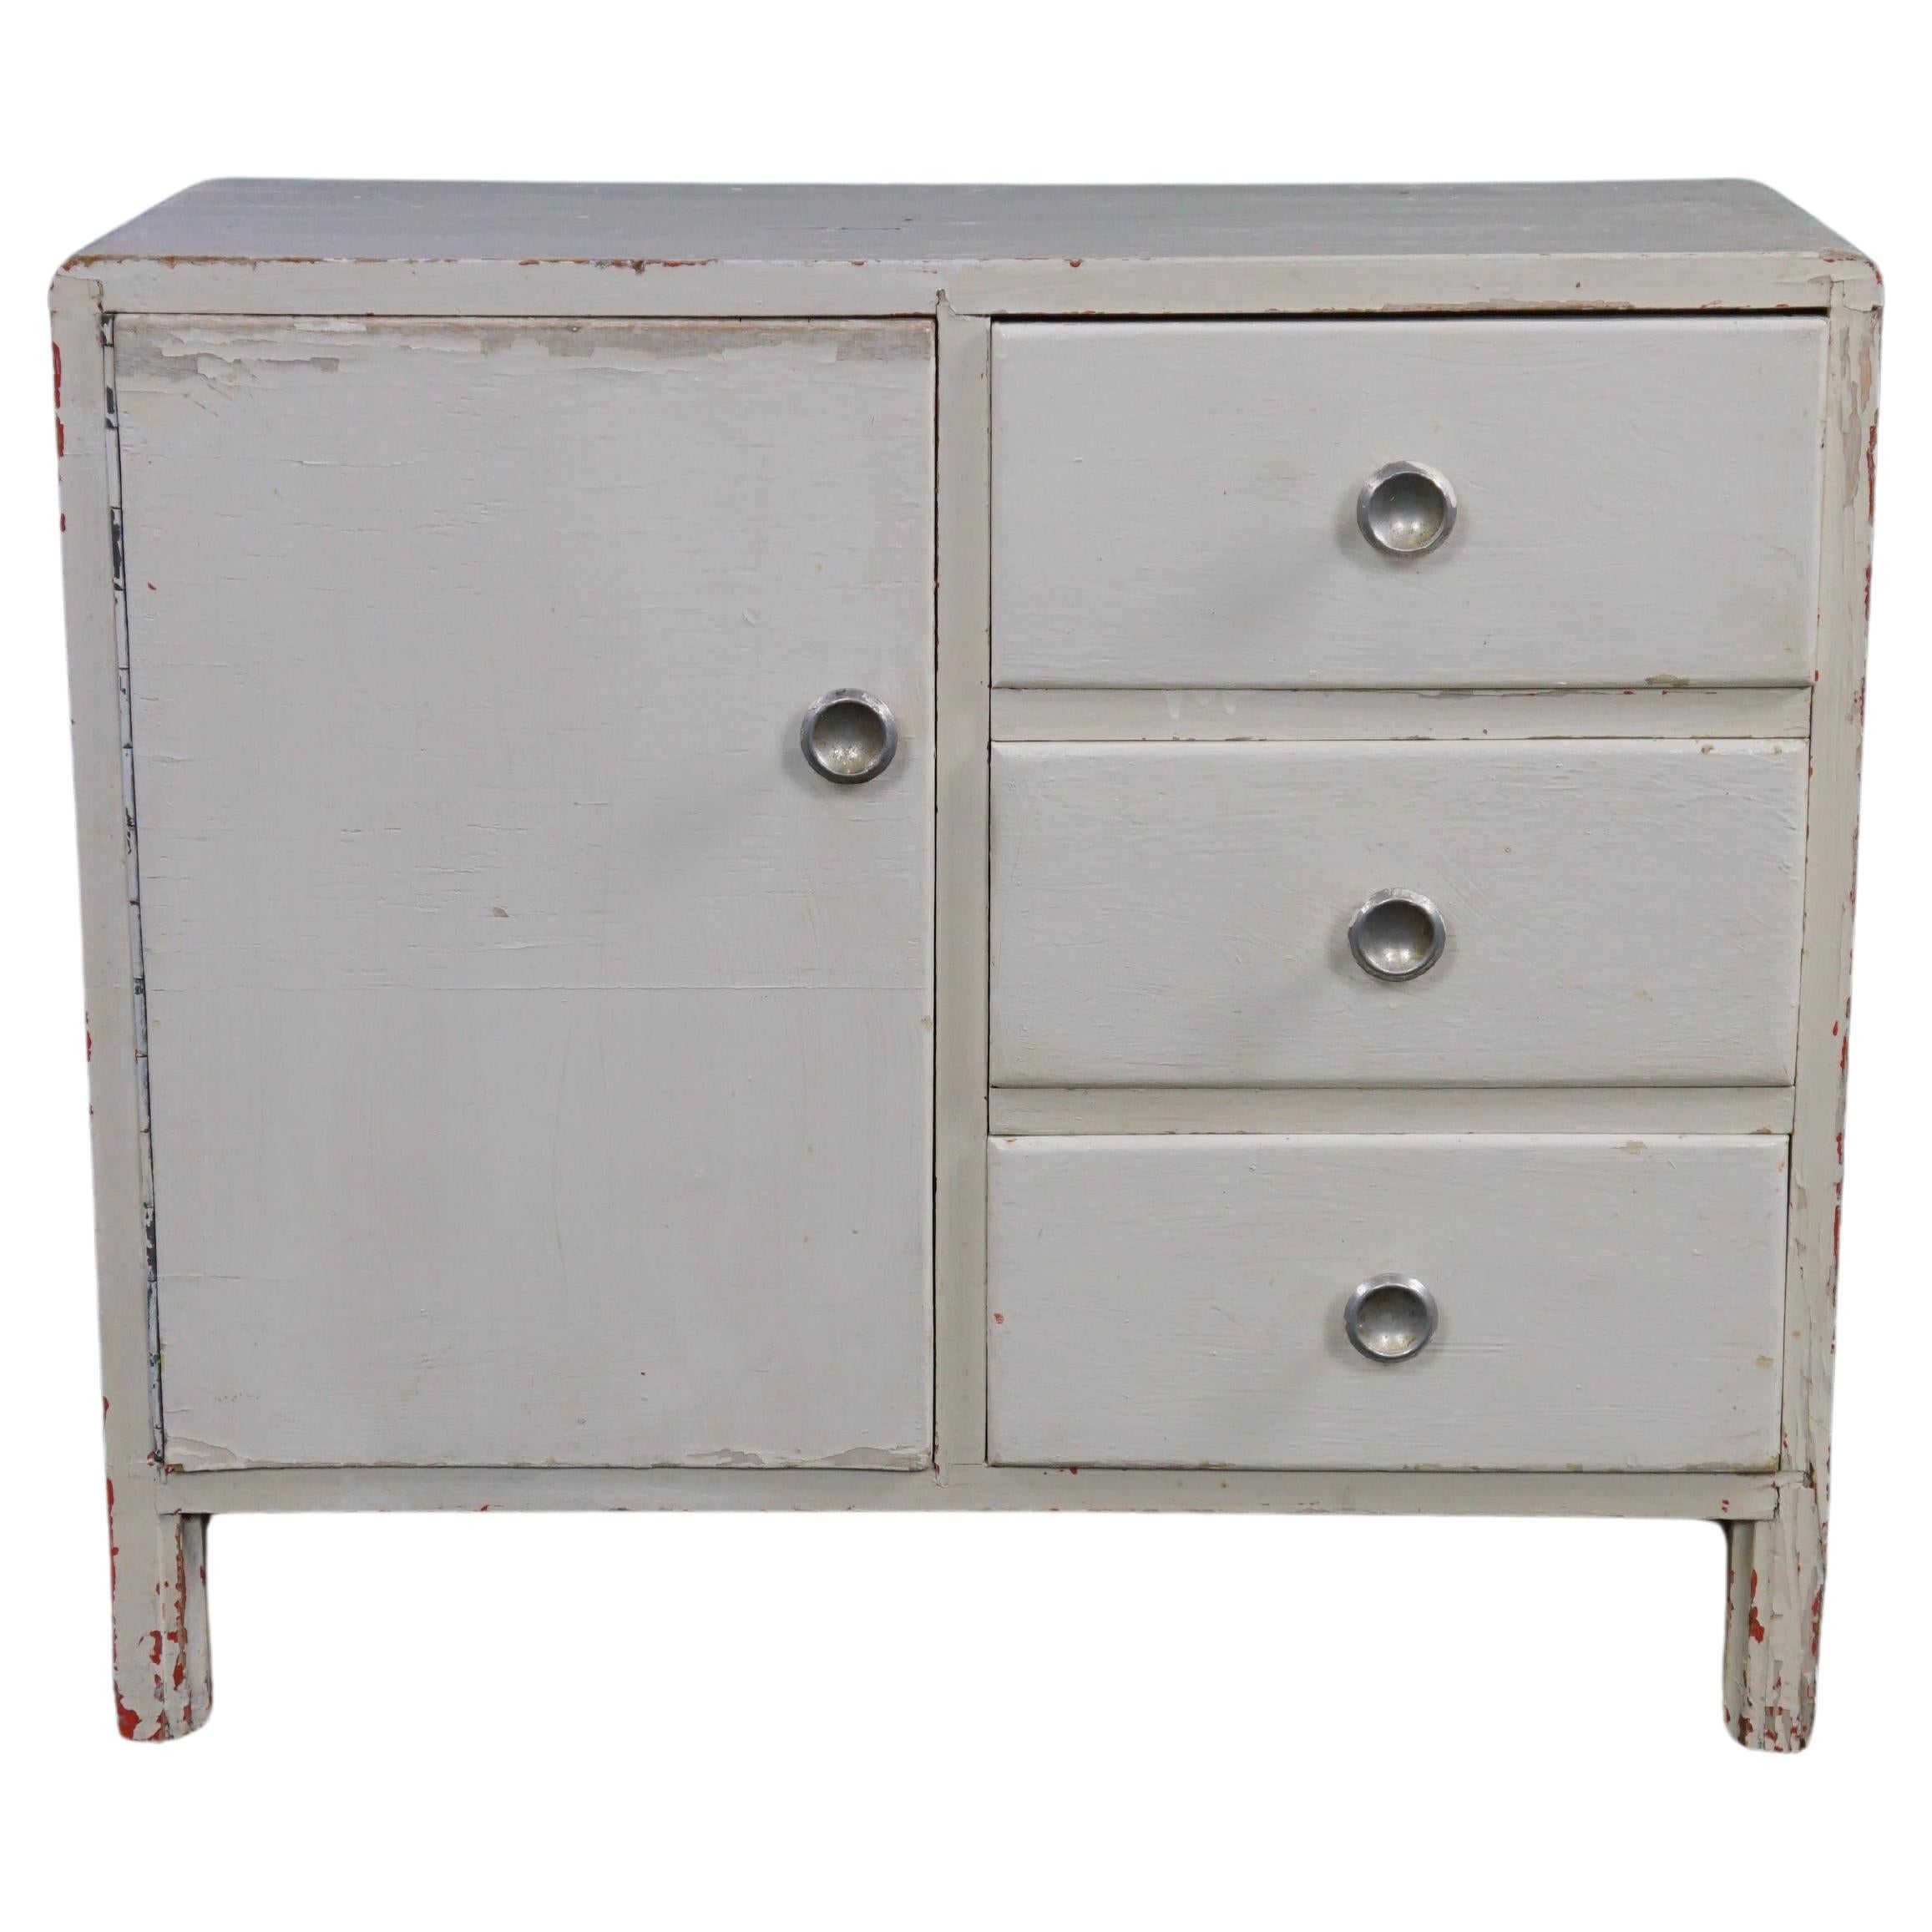 Nice sturdy white wooden cabinet For Sale